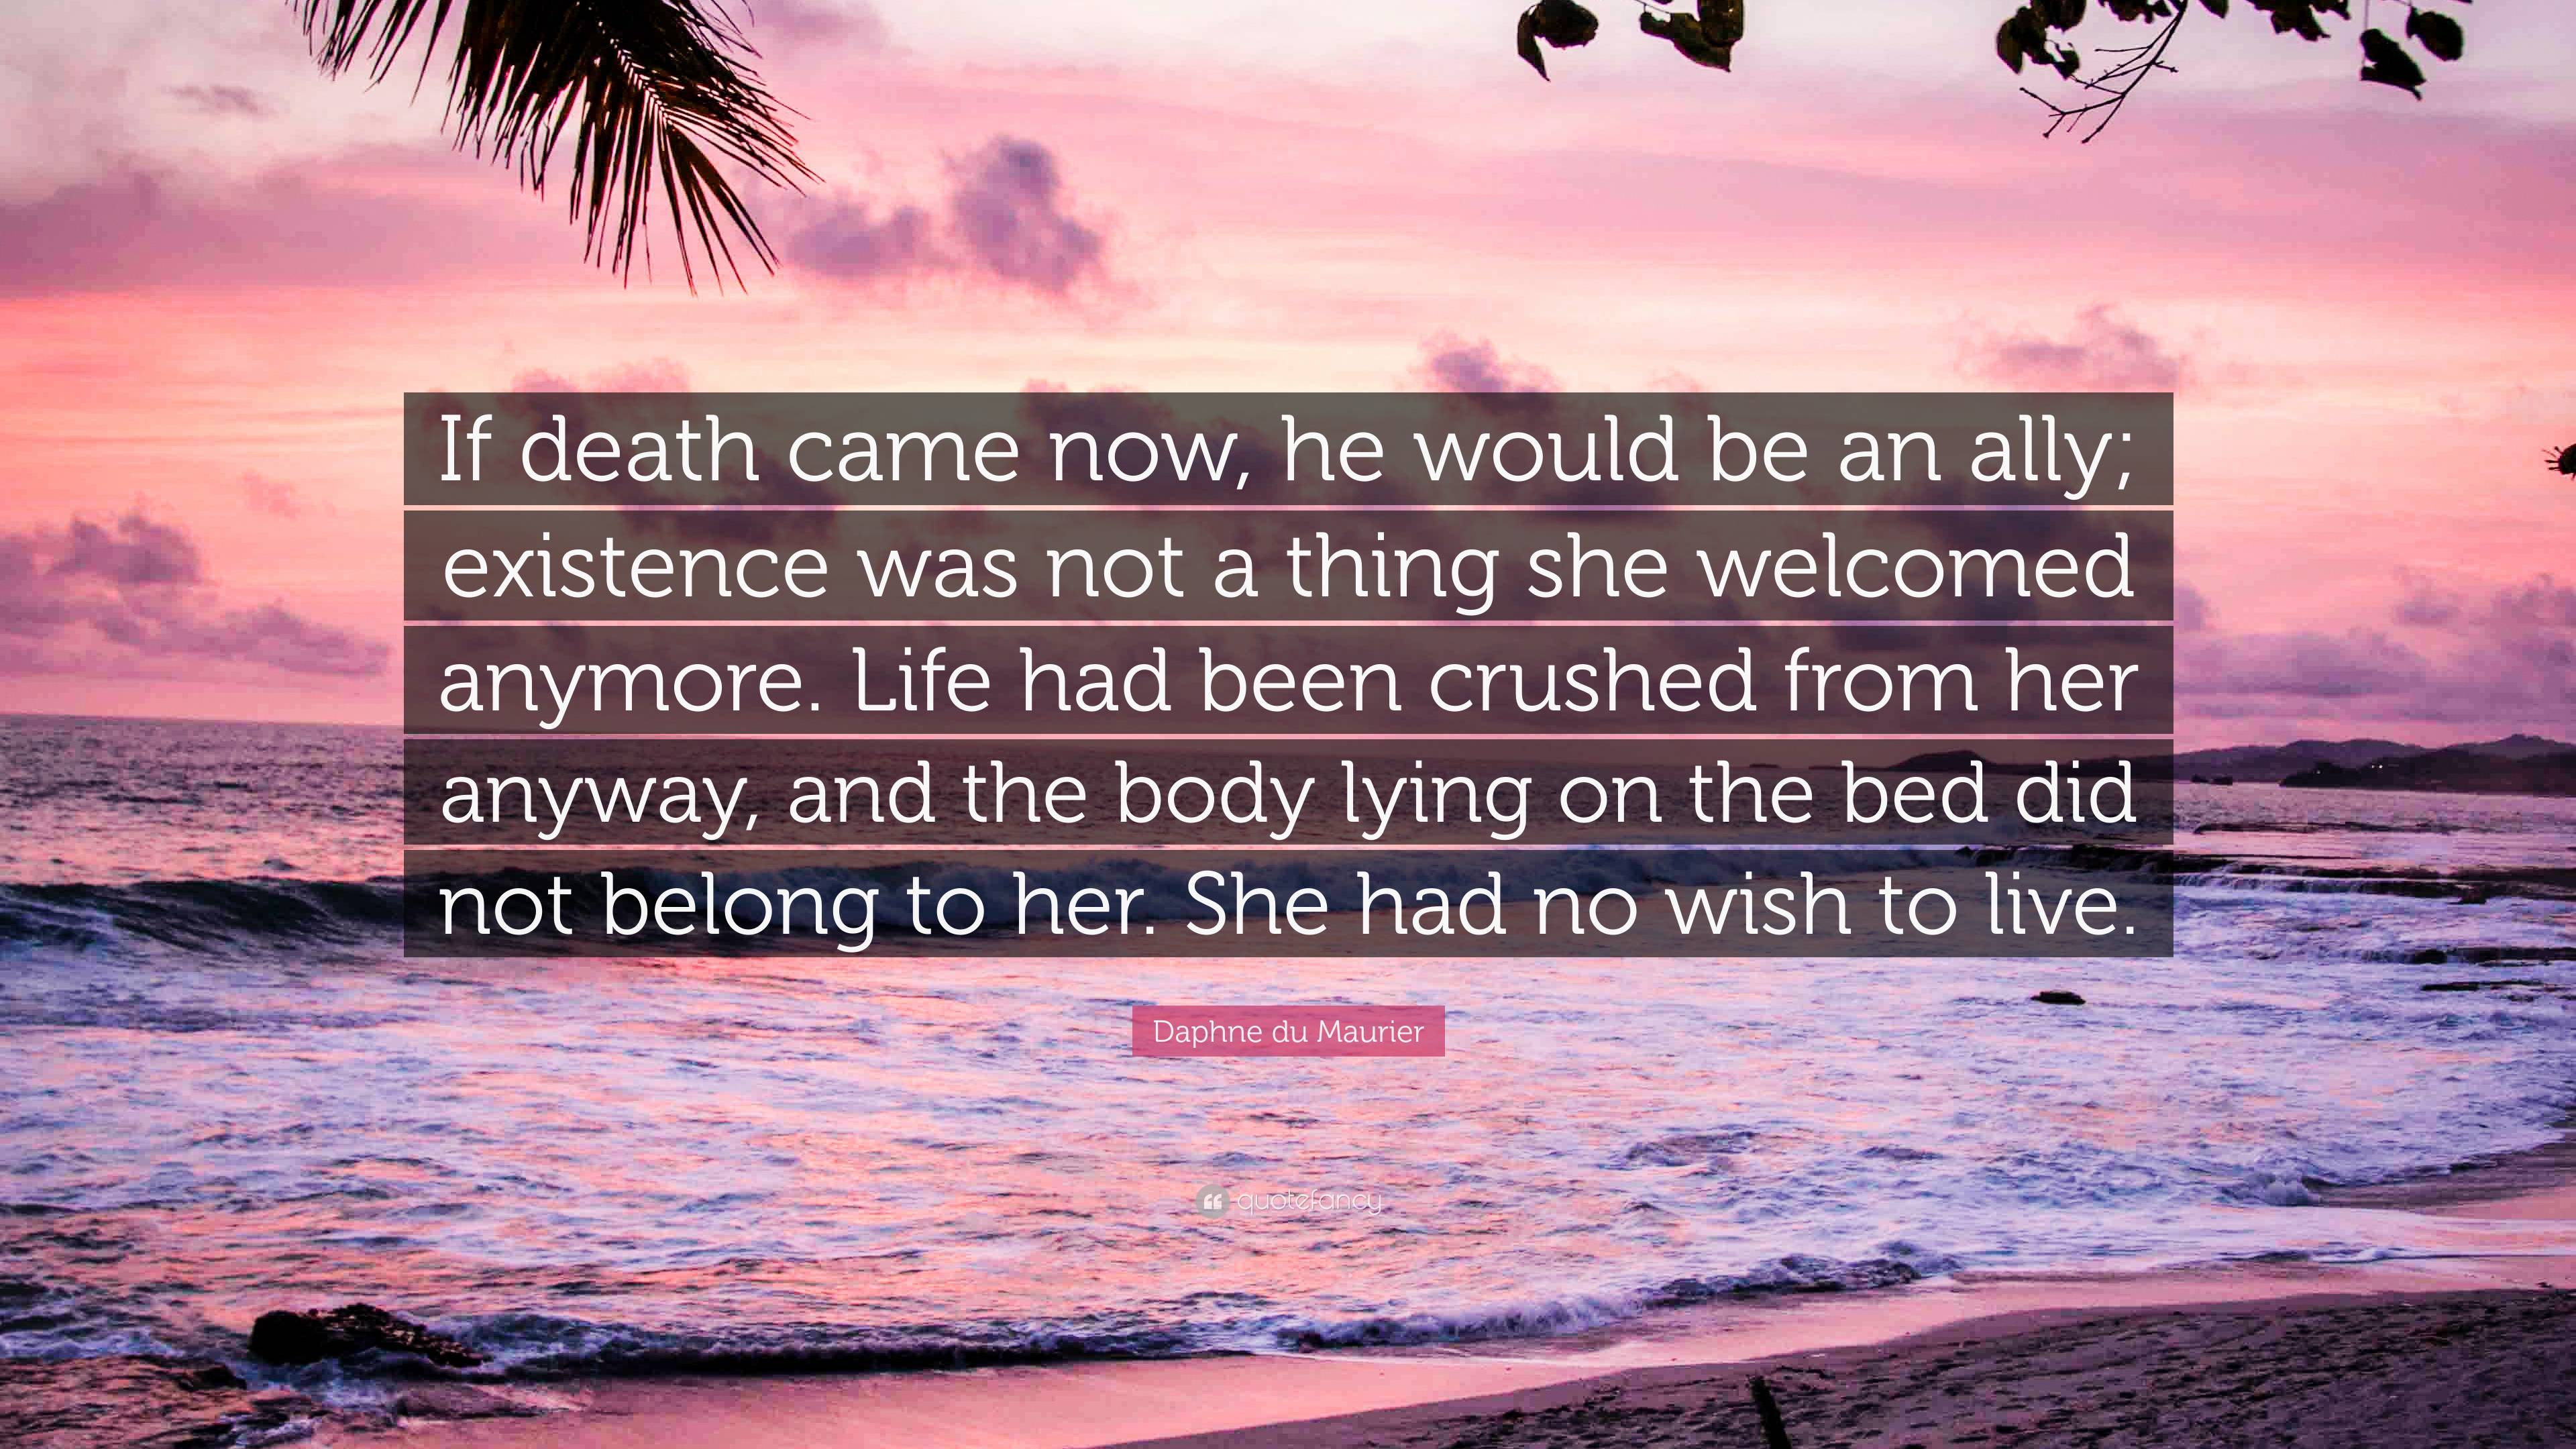 Daphne du Maurier Quote: “If death came now, he would be an ally ...